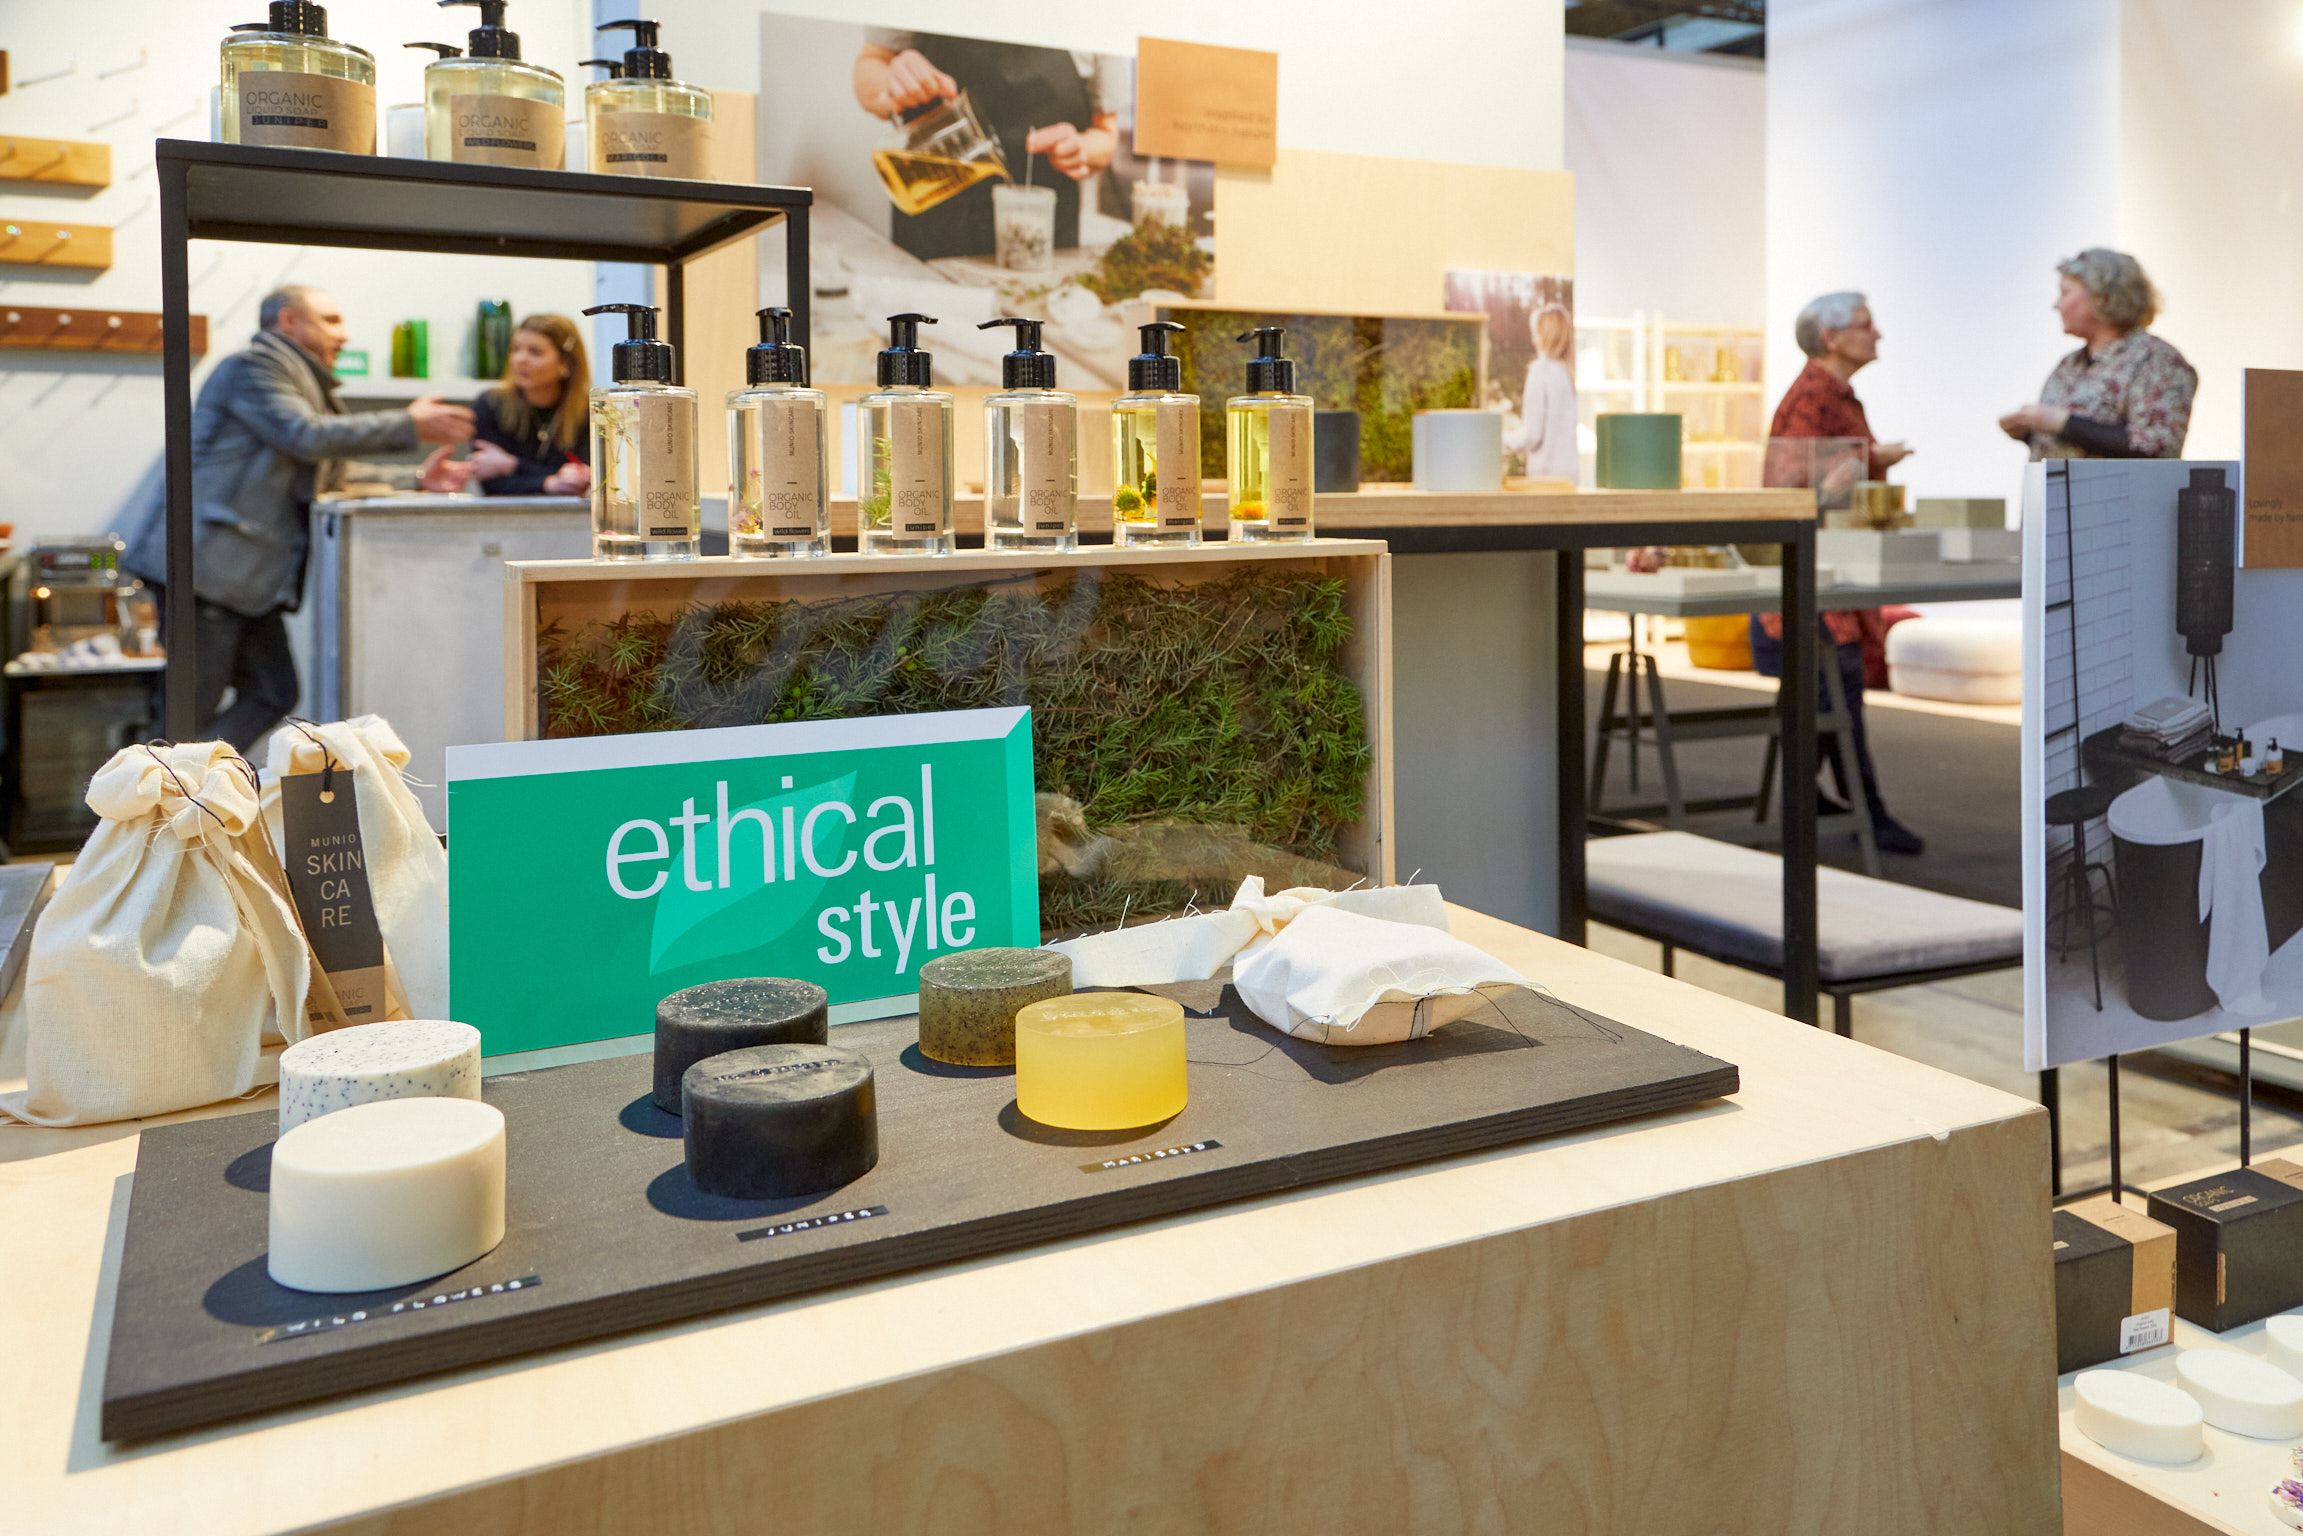 Ethical Style draws attention to sustainable products.